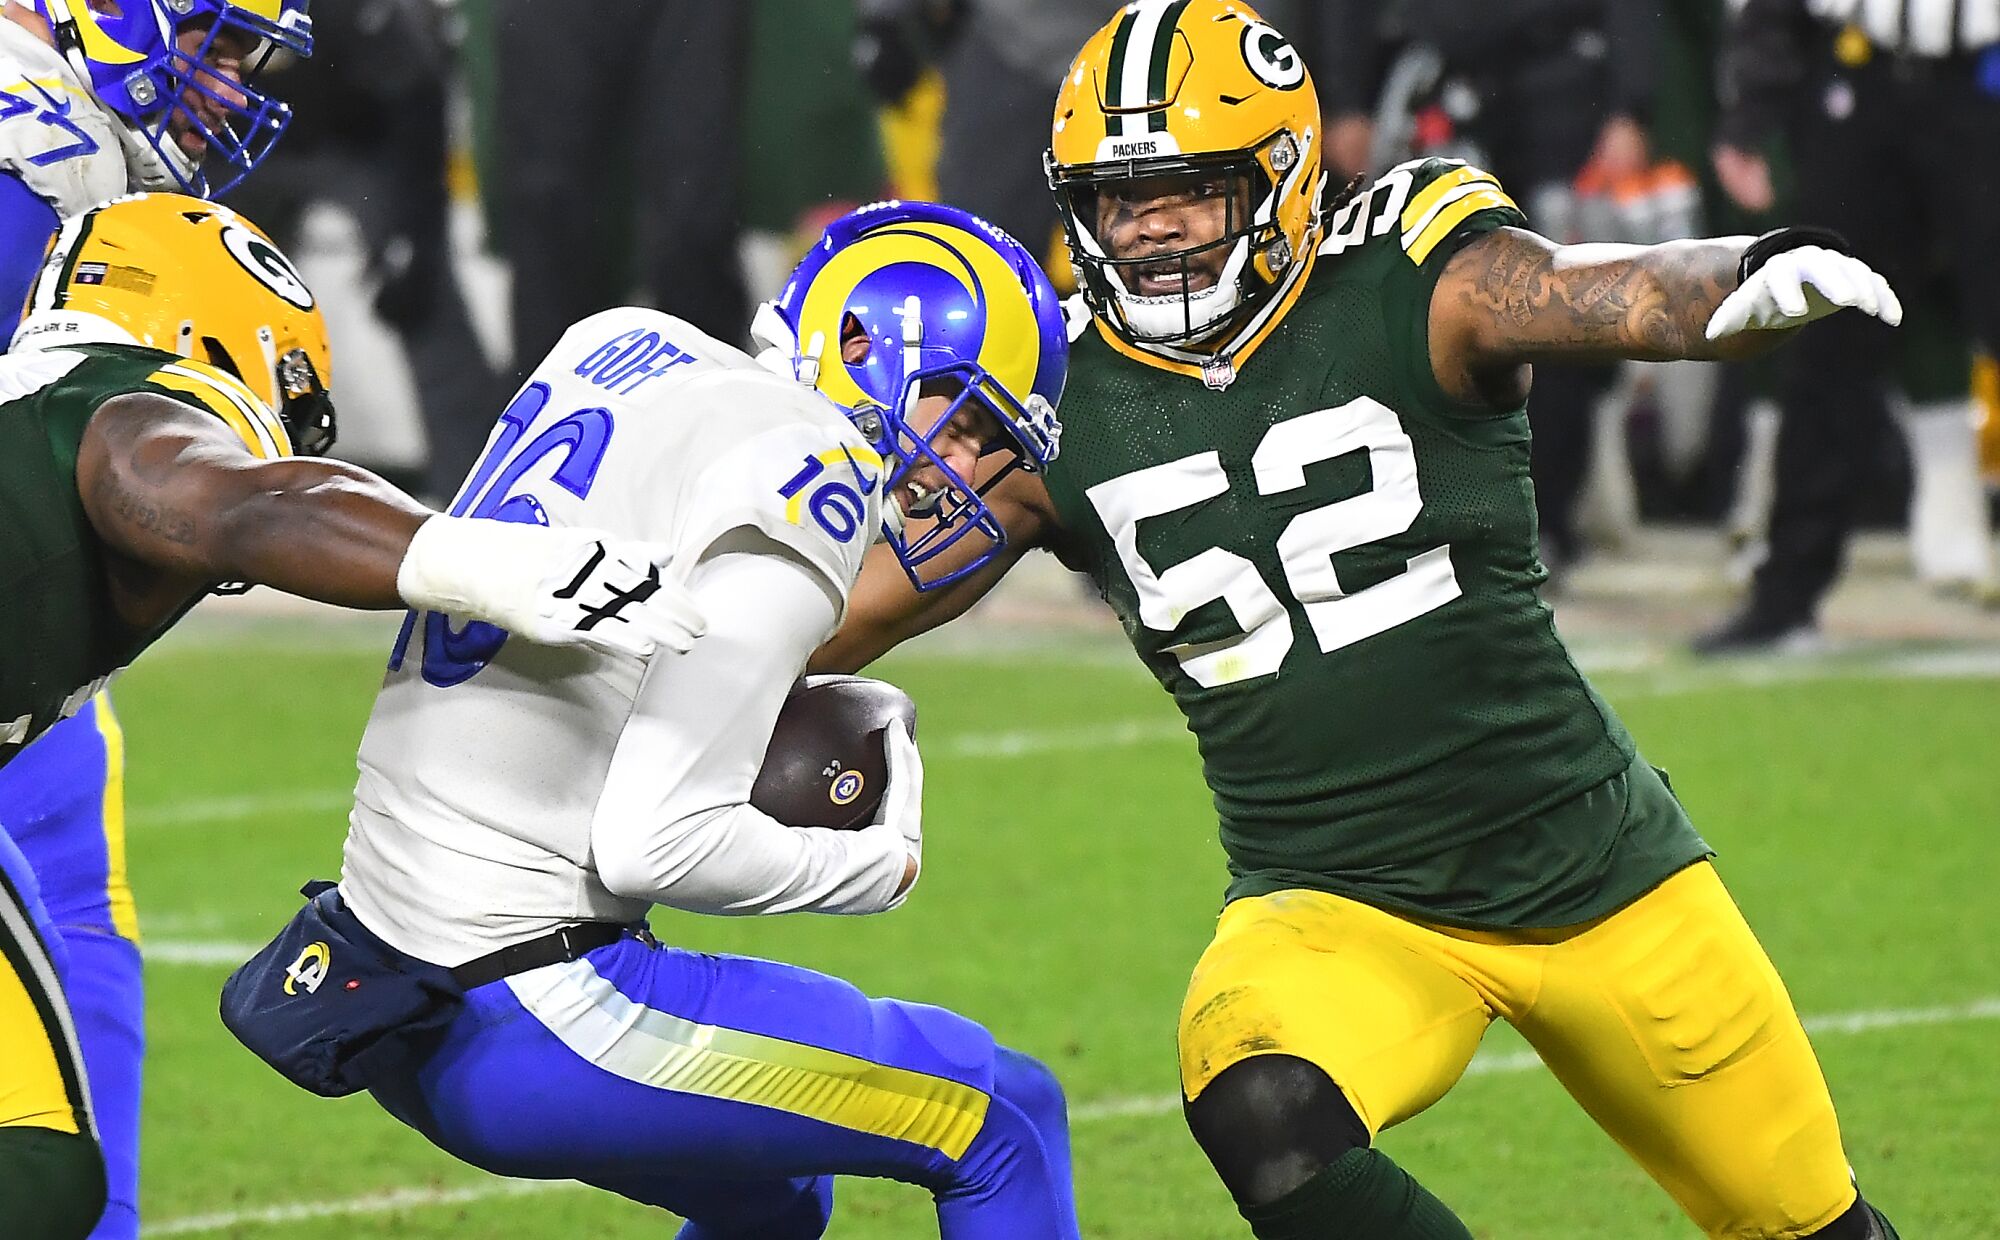 Rams quarterback Jared Goff is sacked by Packers defensive lineman Kenny Clark and linebacker Rashan Gary.